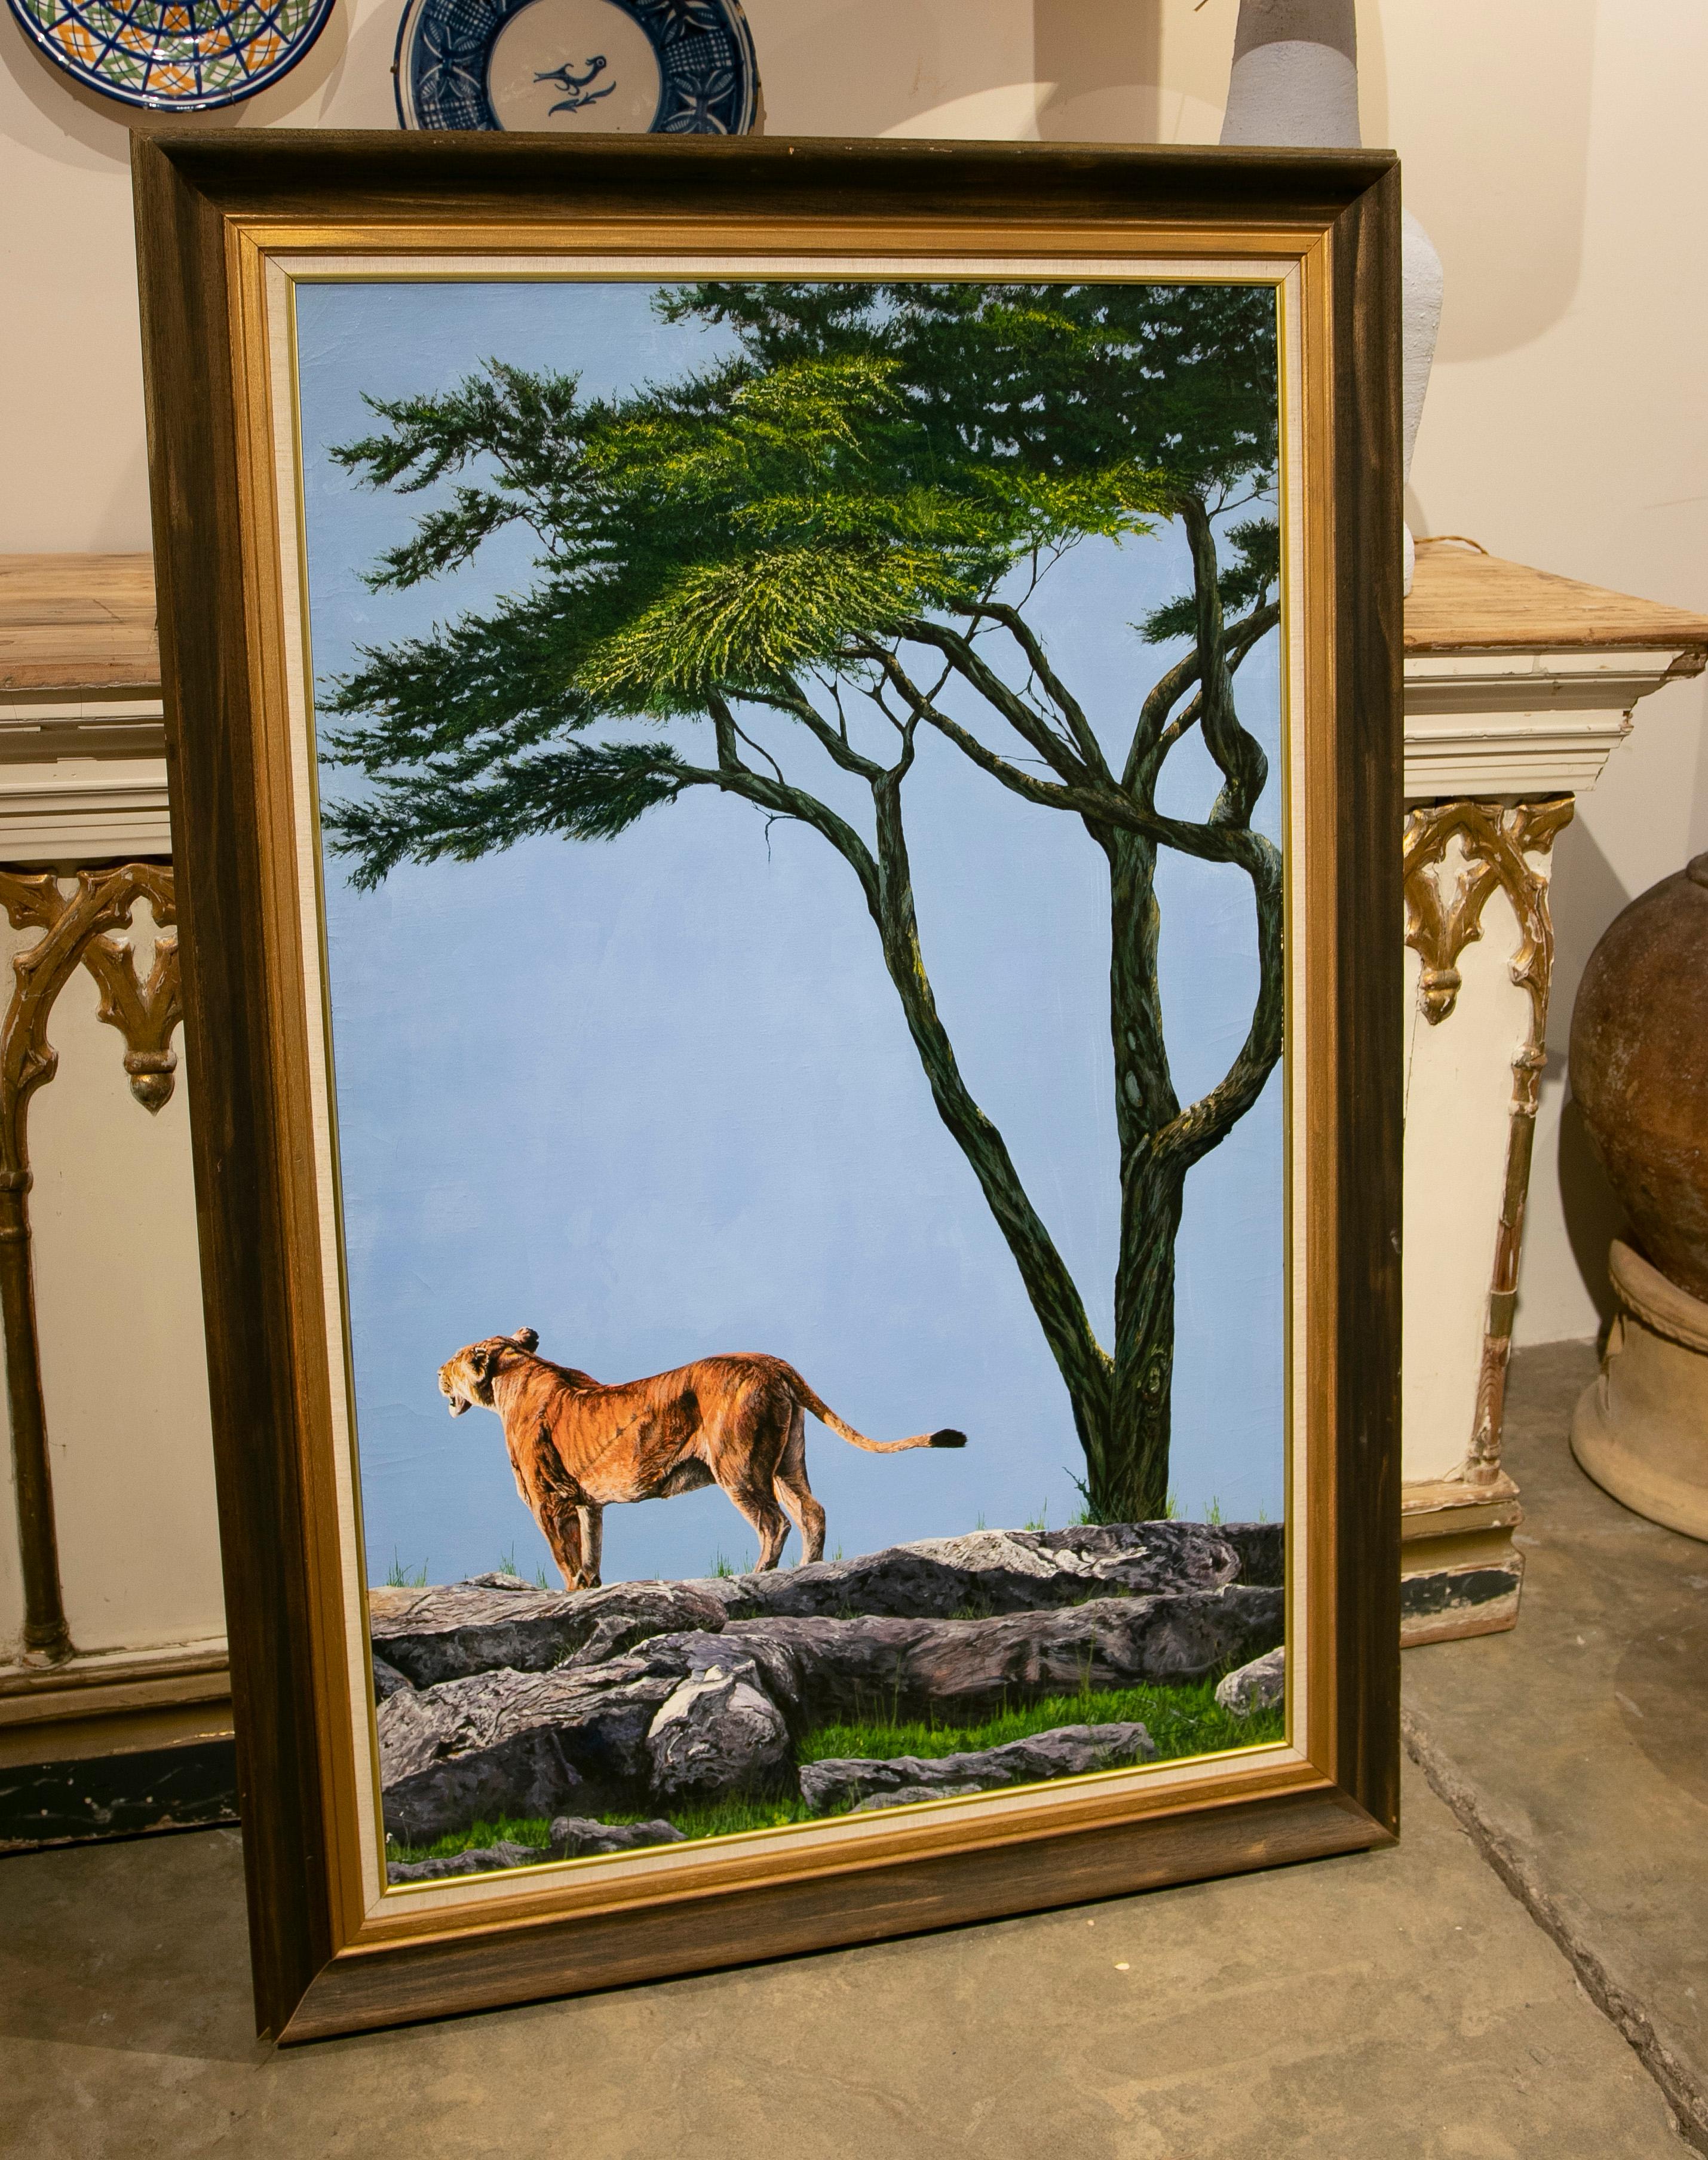 Picture of tiger on hillside with tree painted in Oil on Canvas from 1988
Measurements with frame: 146x96x4cm.